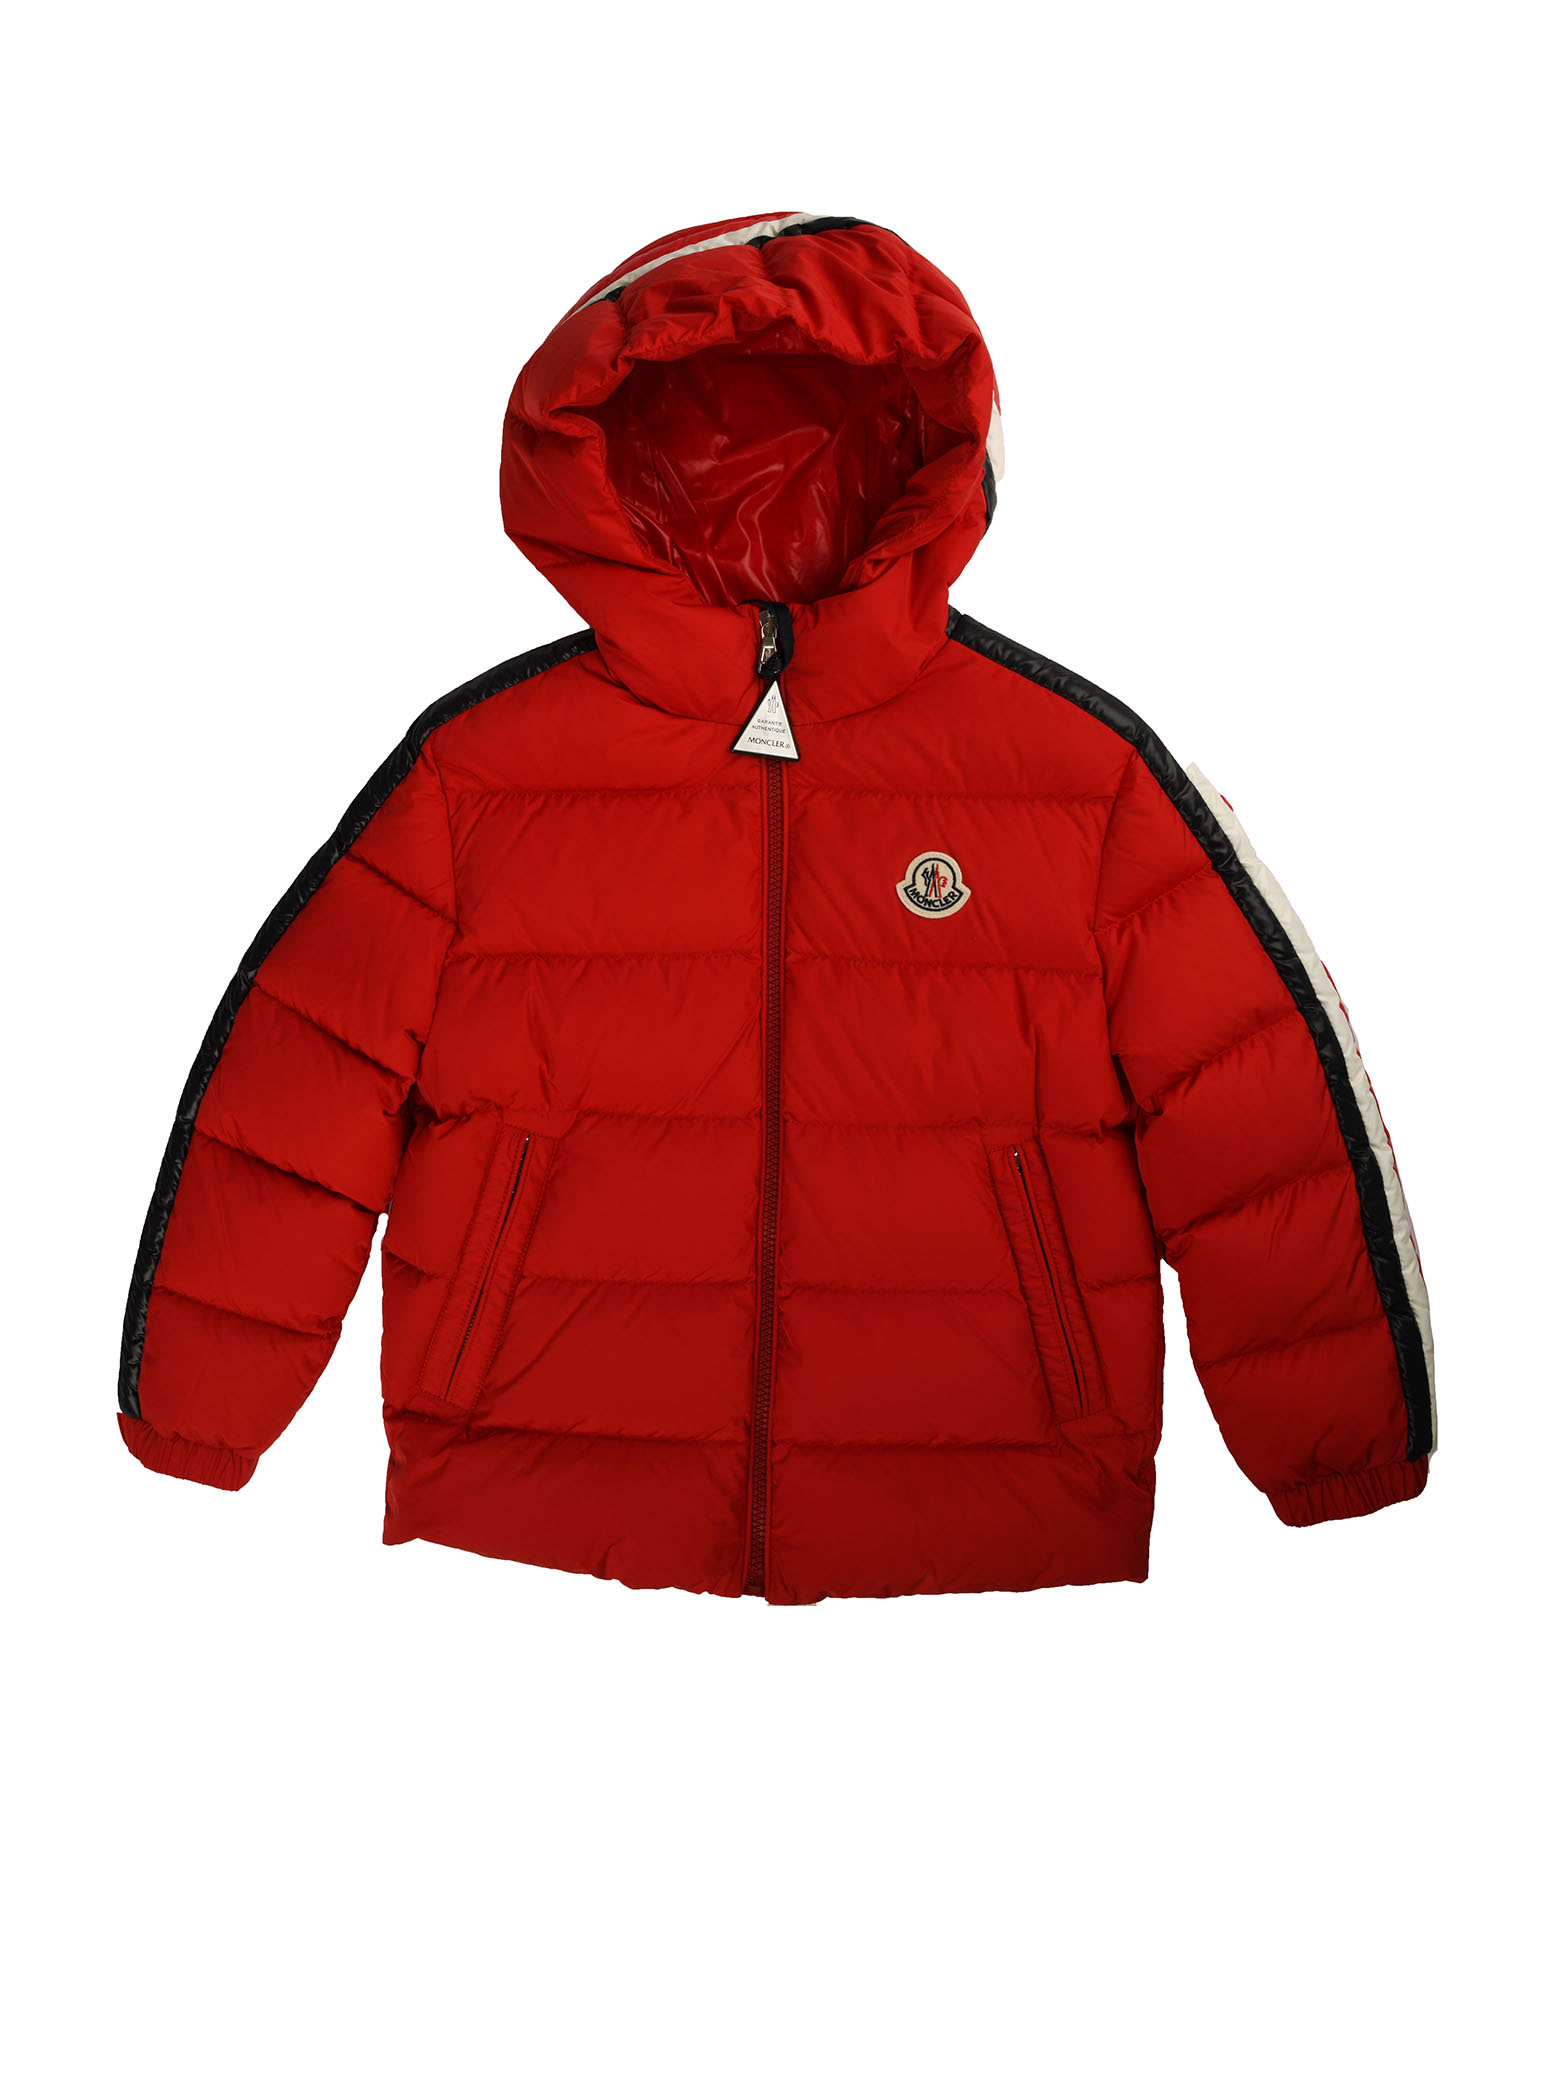 Moncler Red Jacket With Bands And Hood